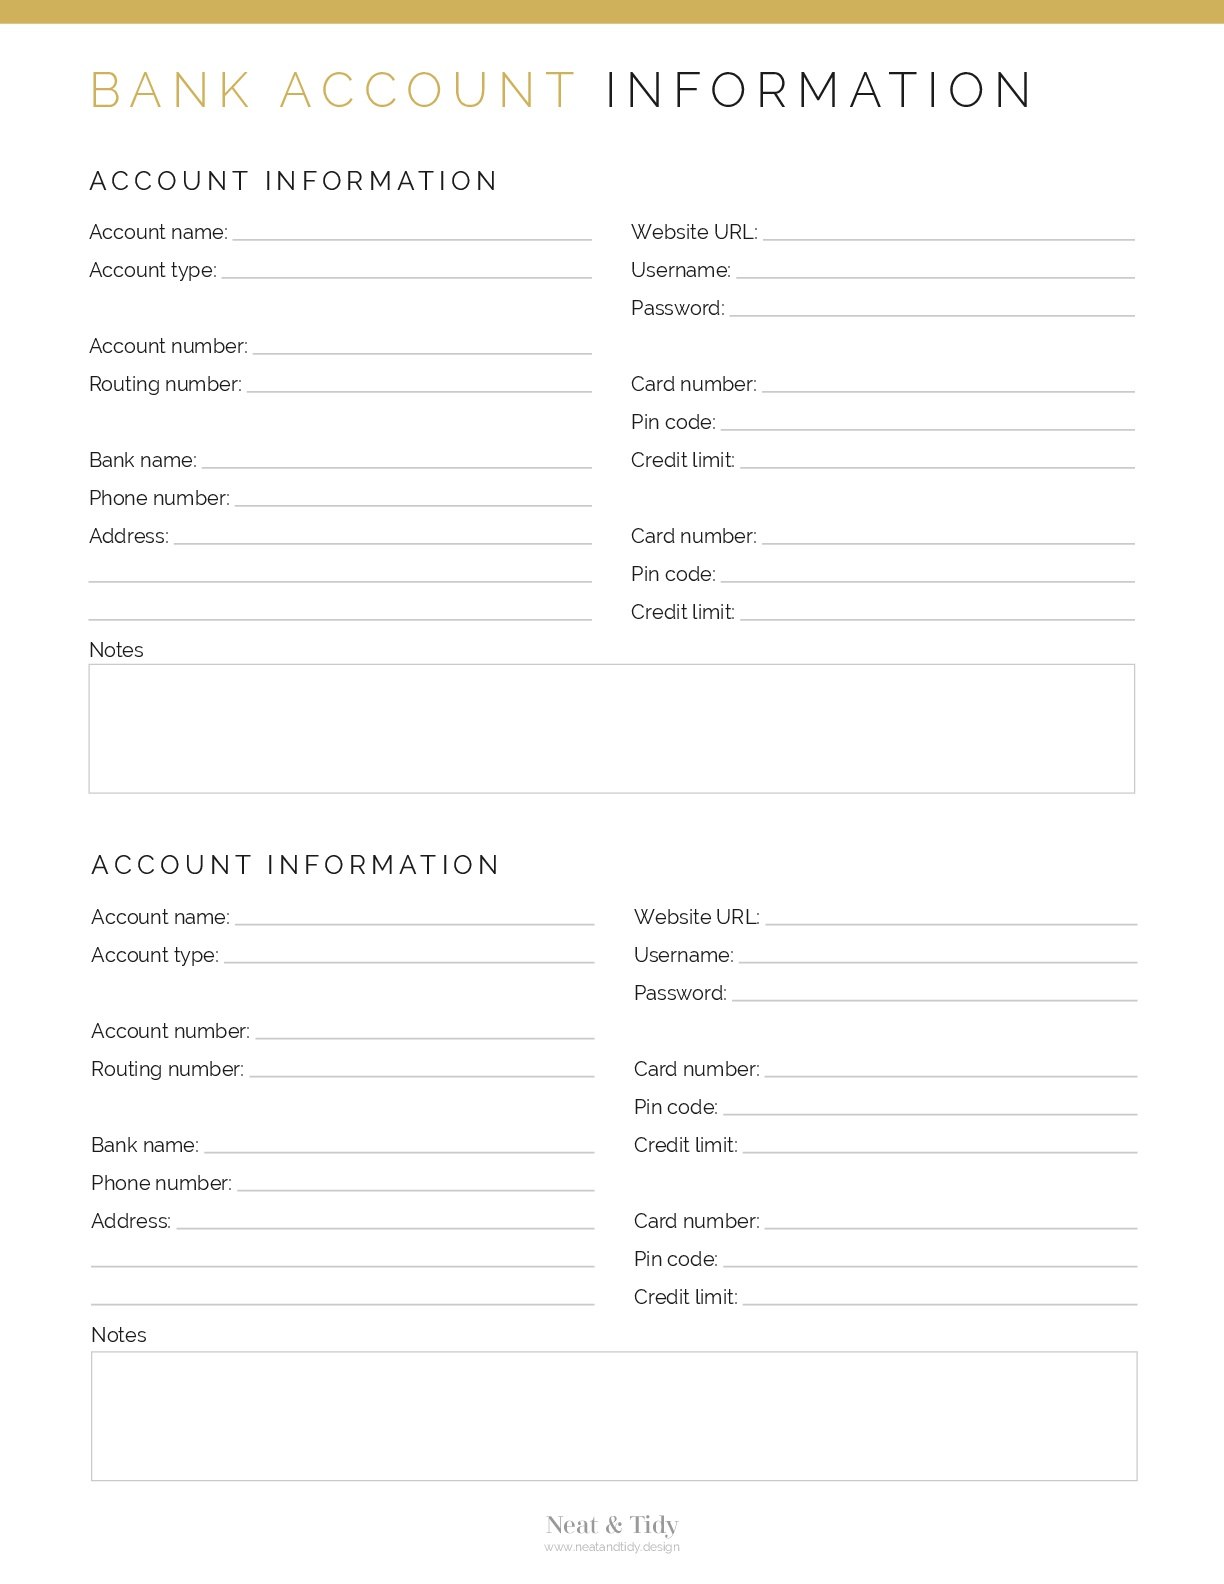 Bank Account Information Neat And Tidy Design 4299